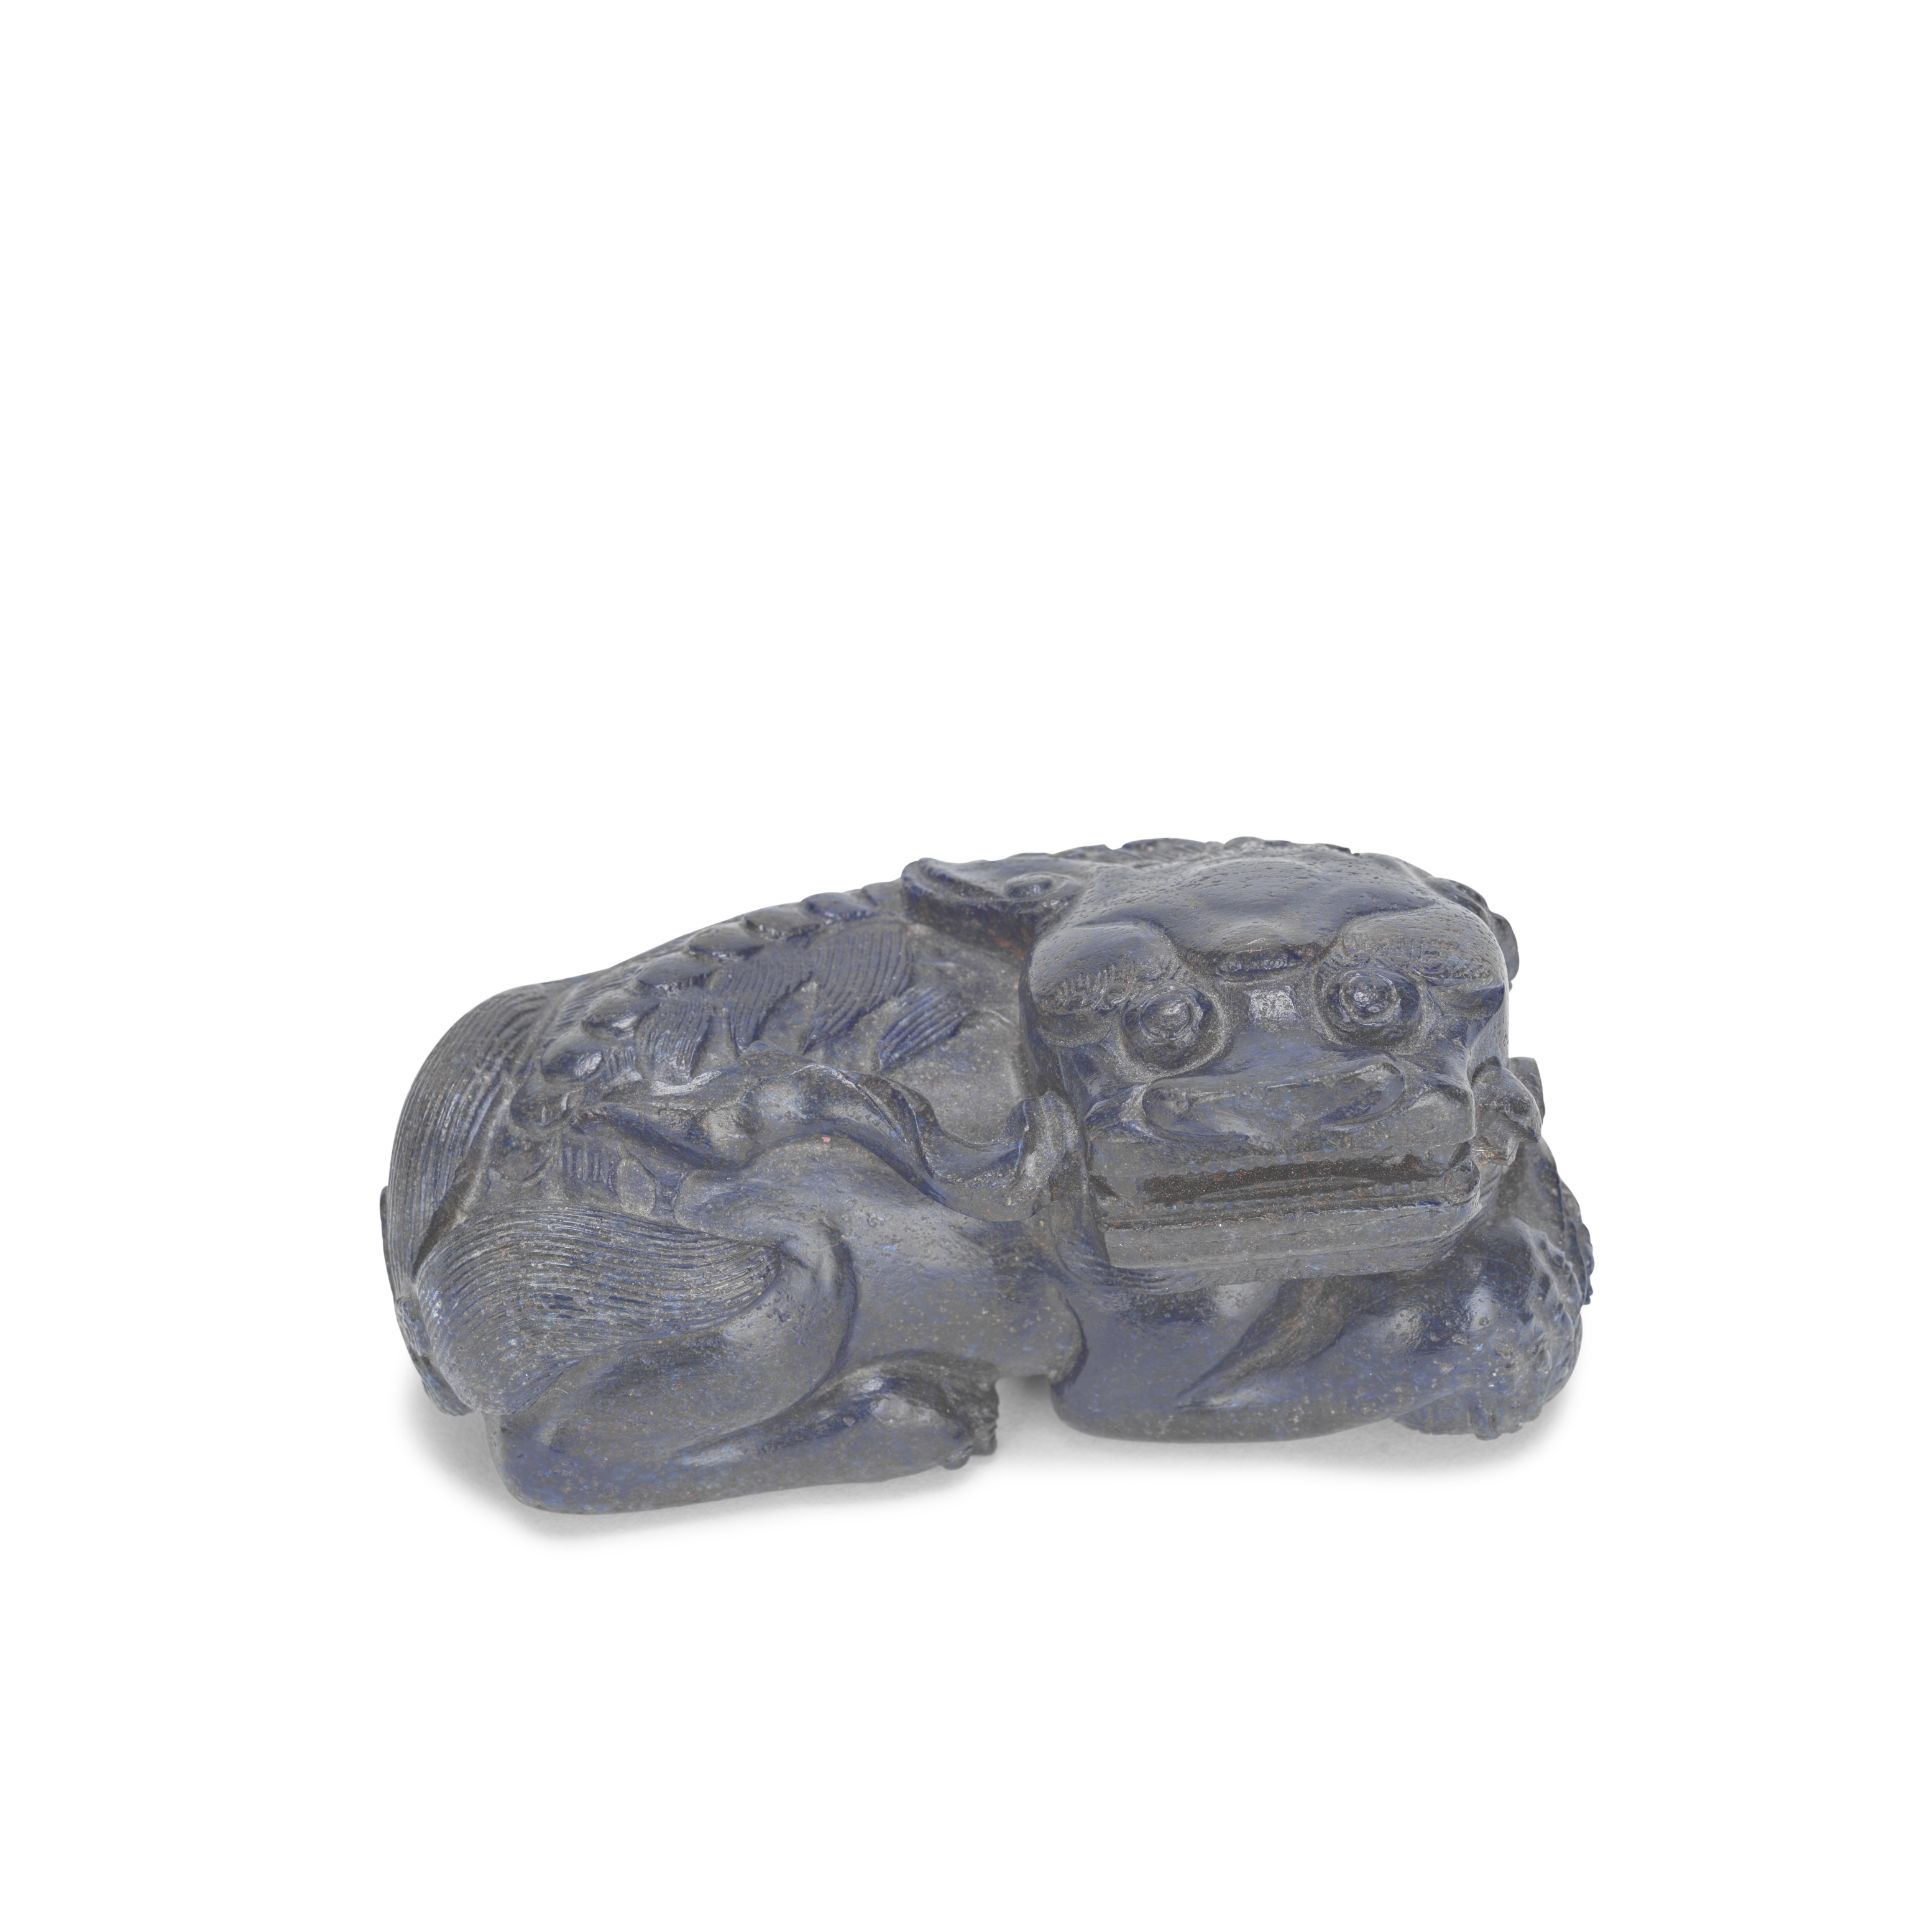 A CARVED LAPIS 'LION' CARVING 18th century